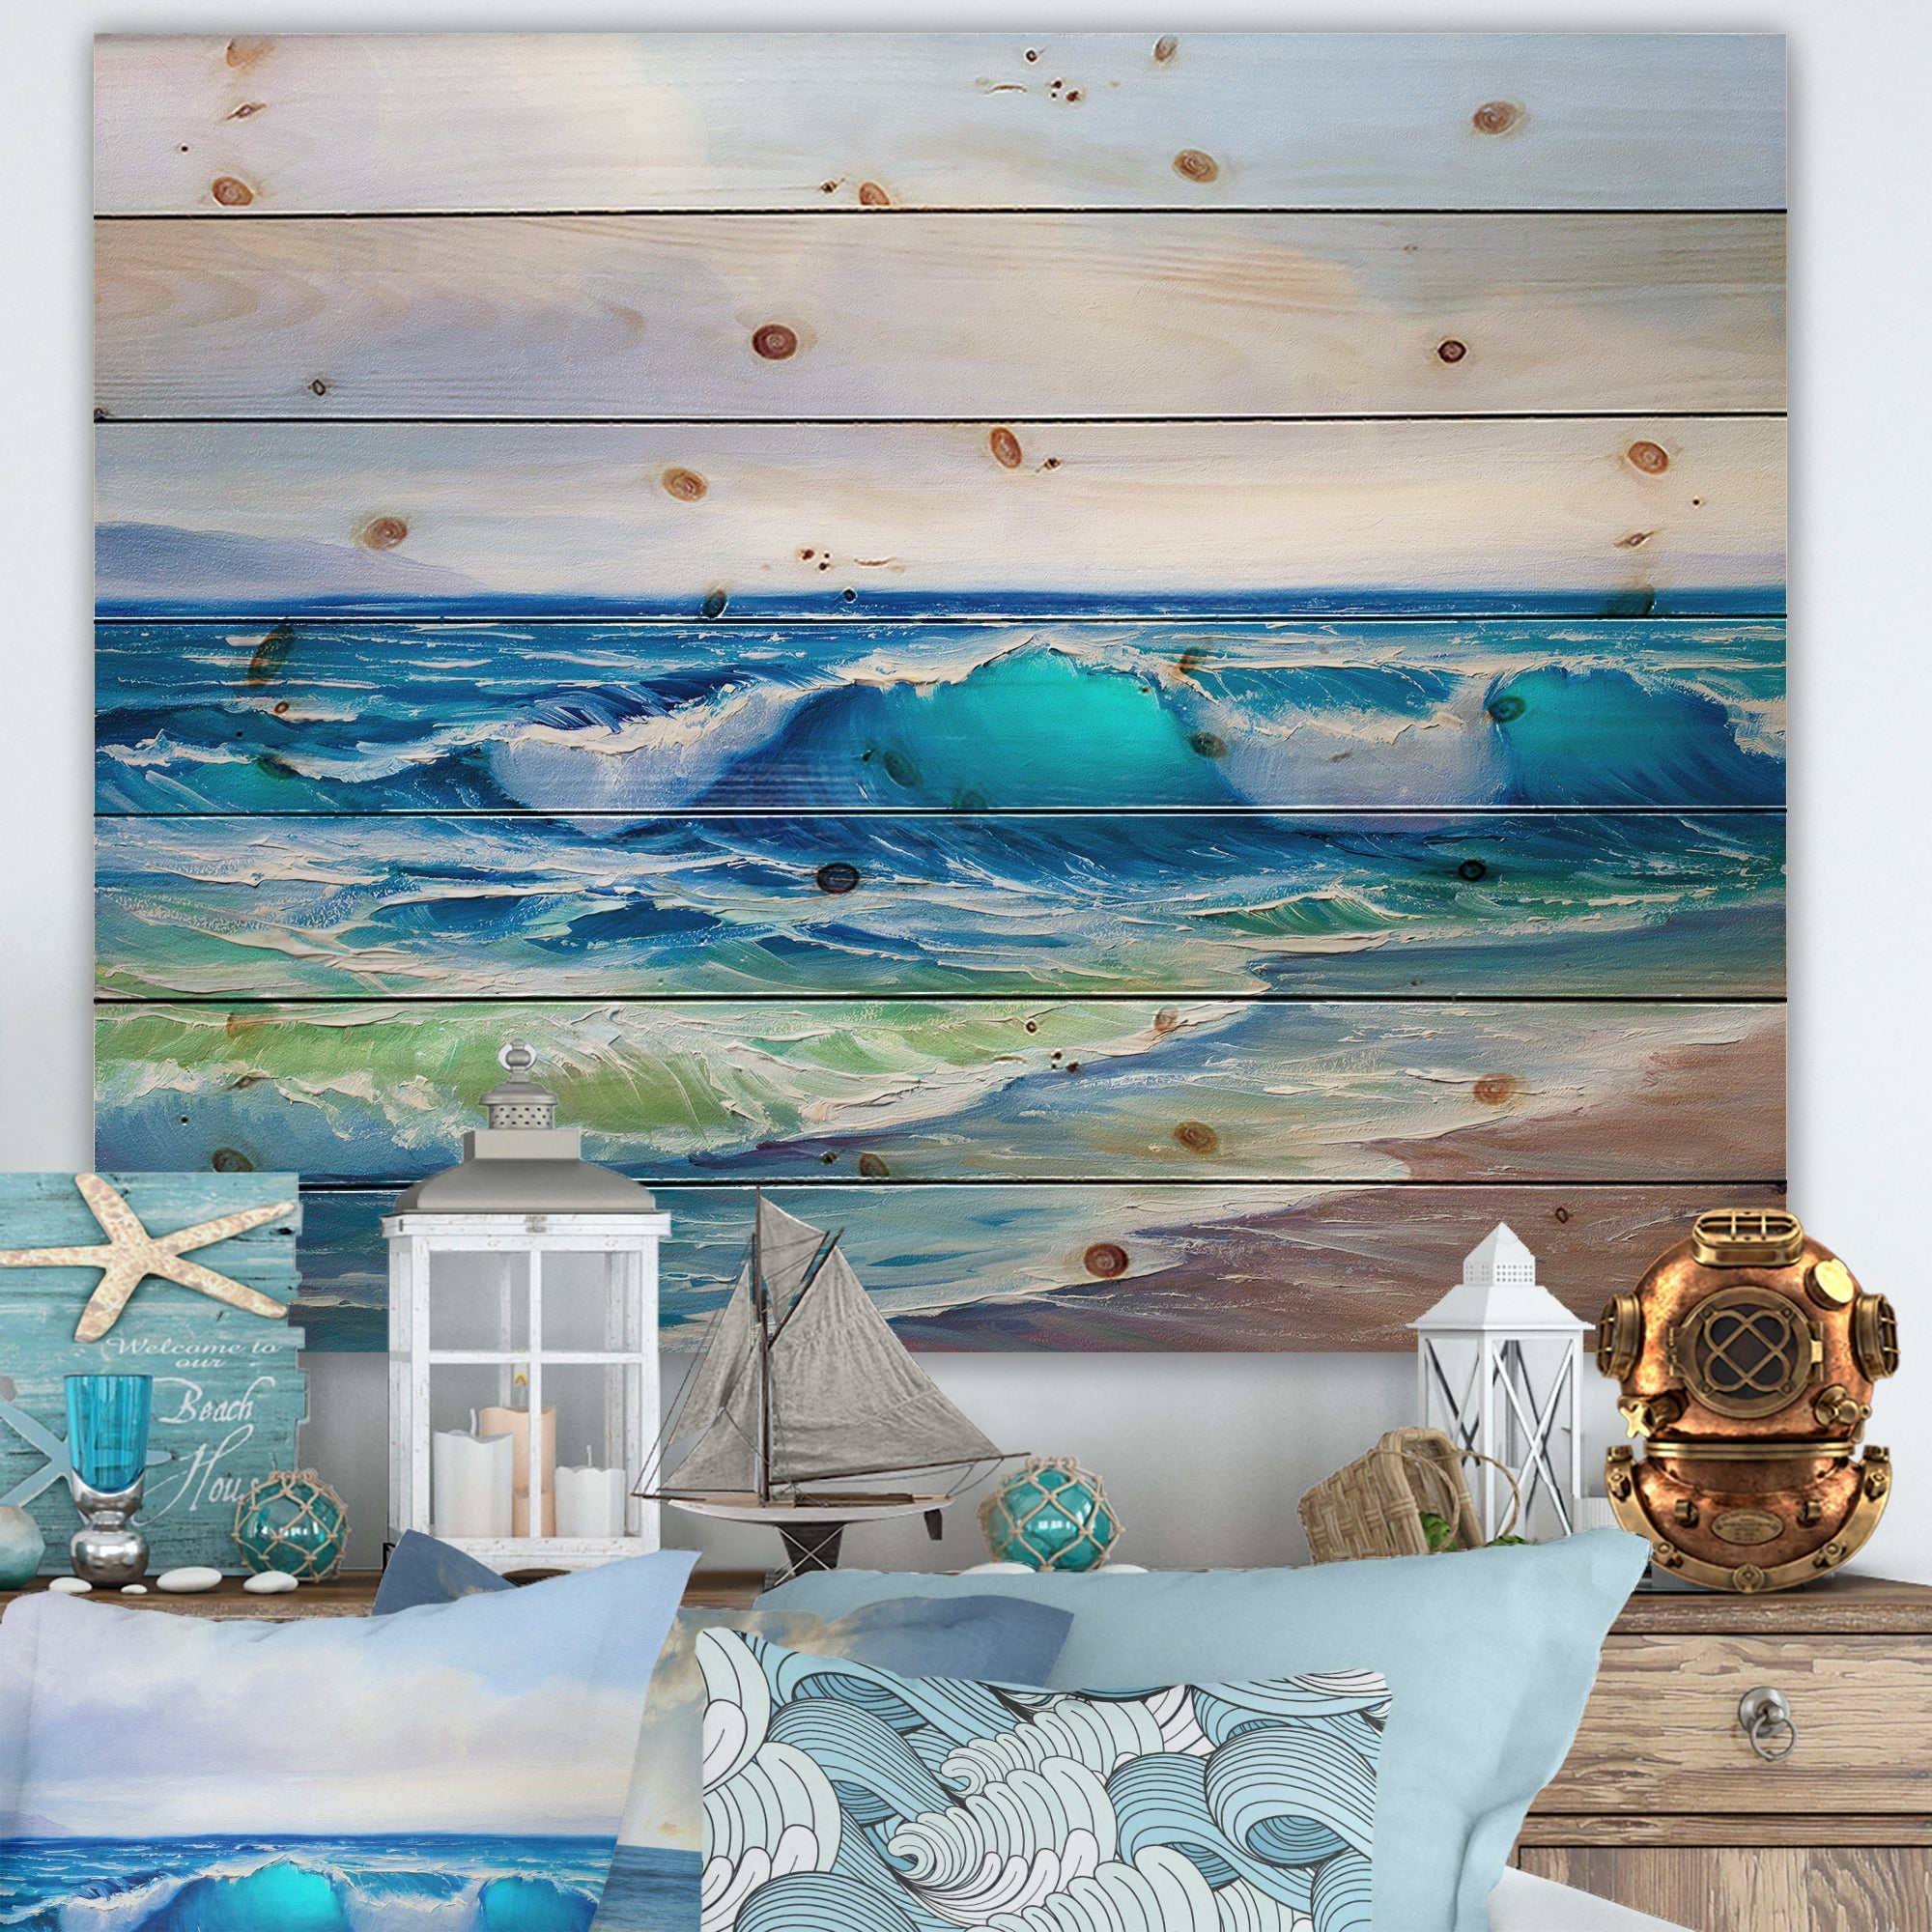 Seascape With Sunlight Catching A Wave - Nautical & Coastal Print on Natural Pine Wood